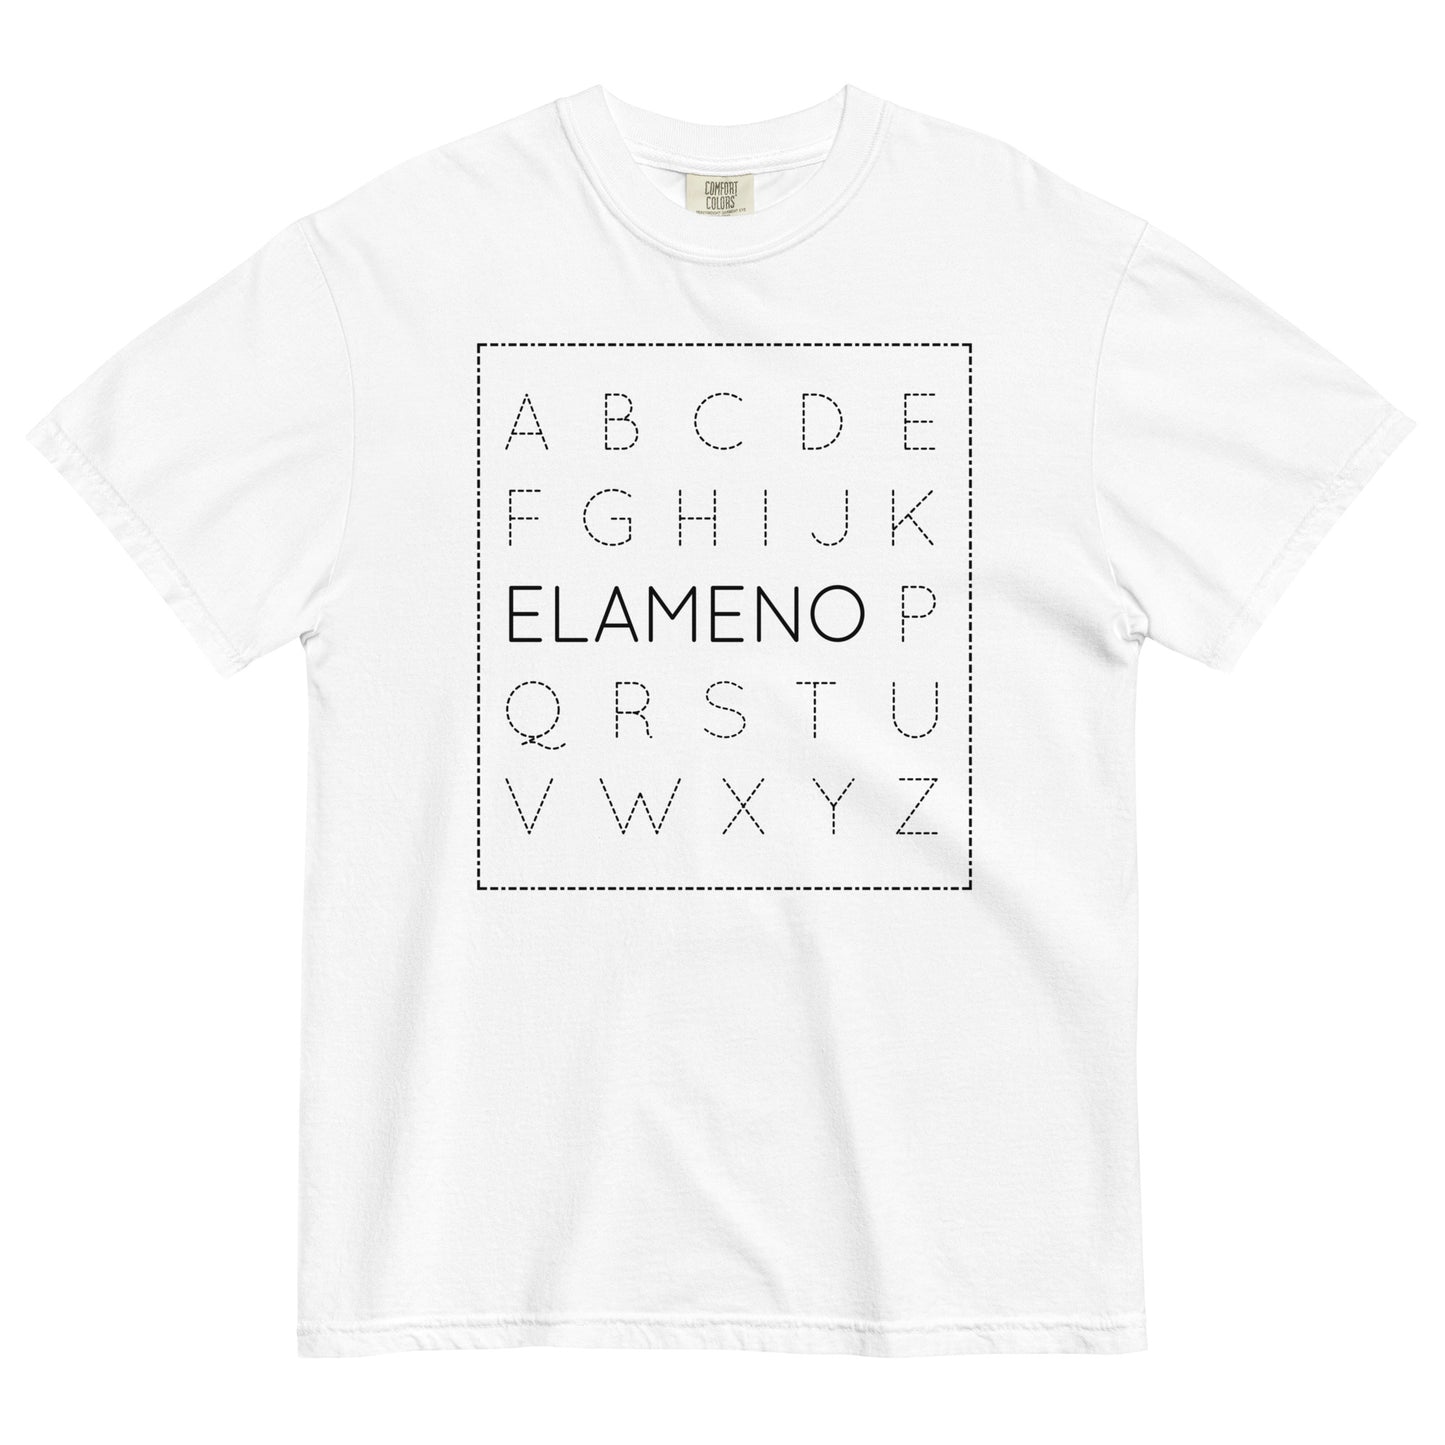 Elameno Men's Relaxed Fit Tee